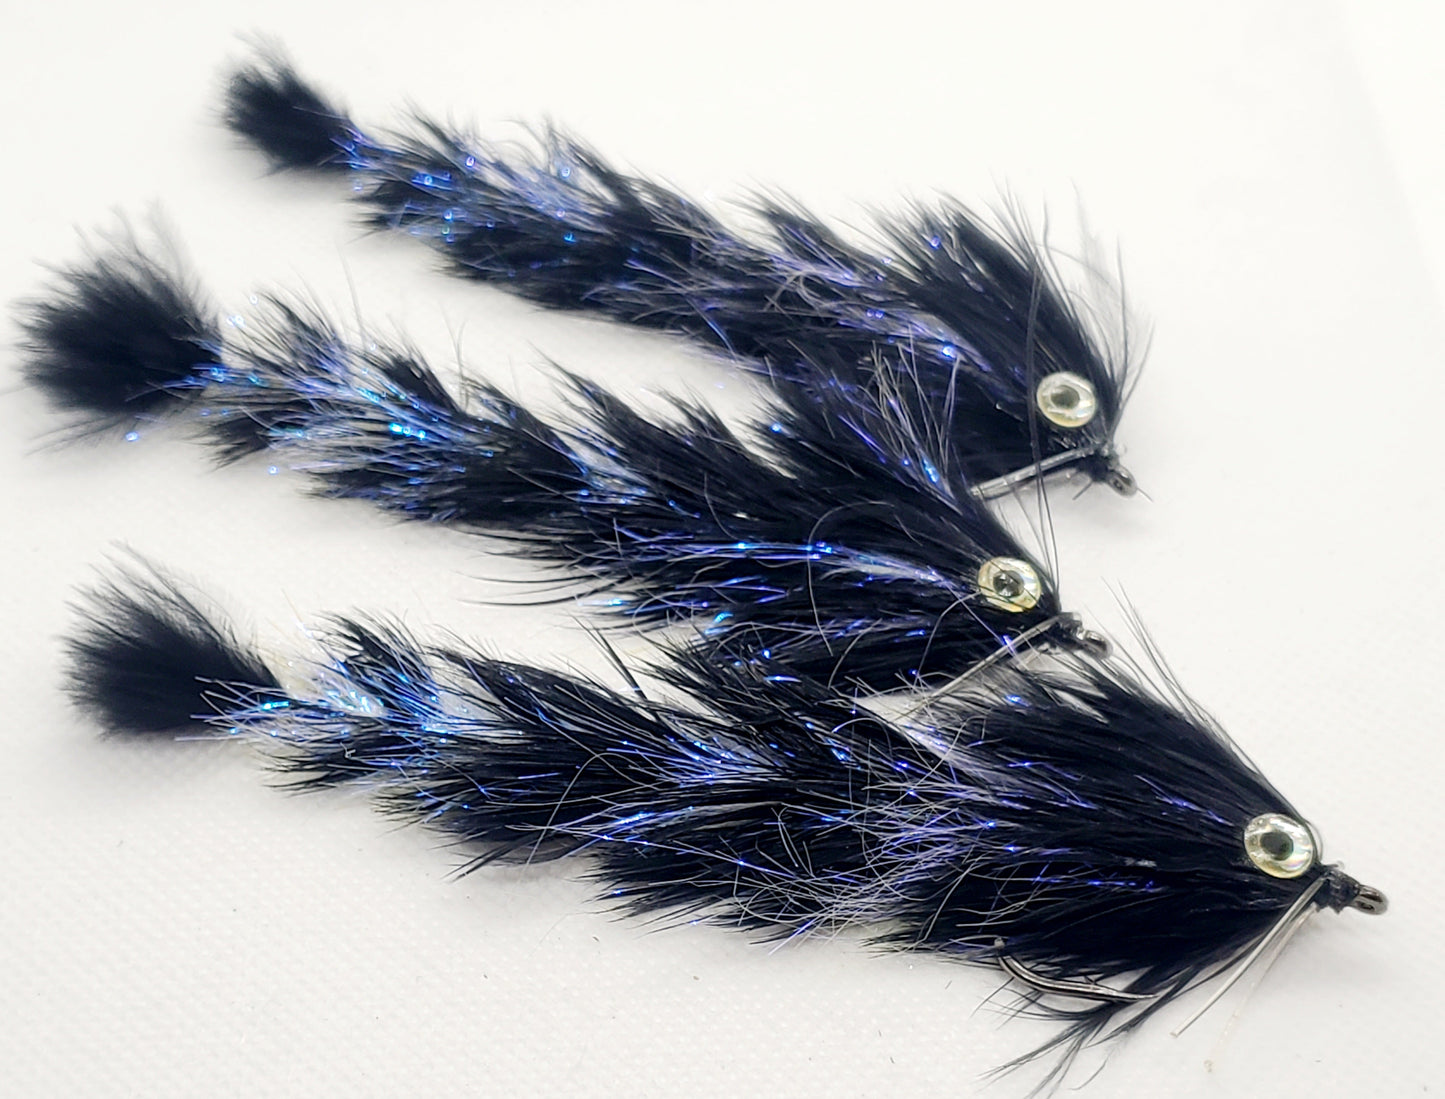 Feather Changer Fly, Chocklett's Game Changer, Feather Changer 4.5